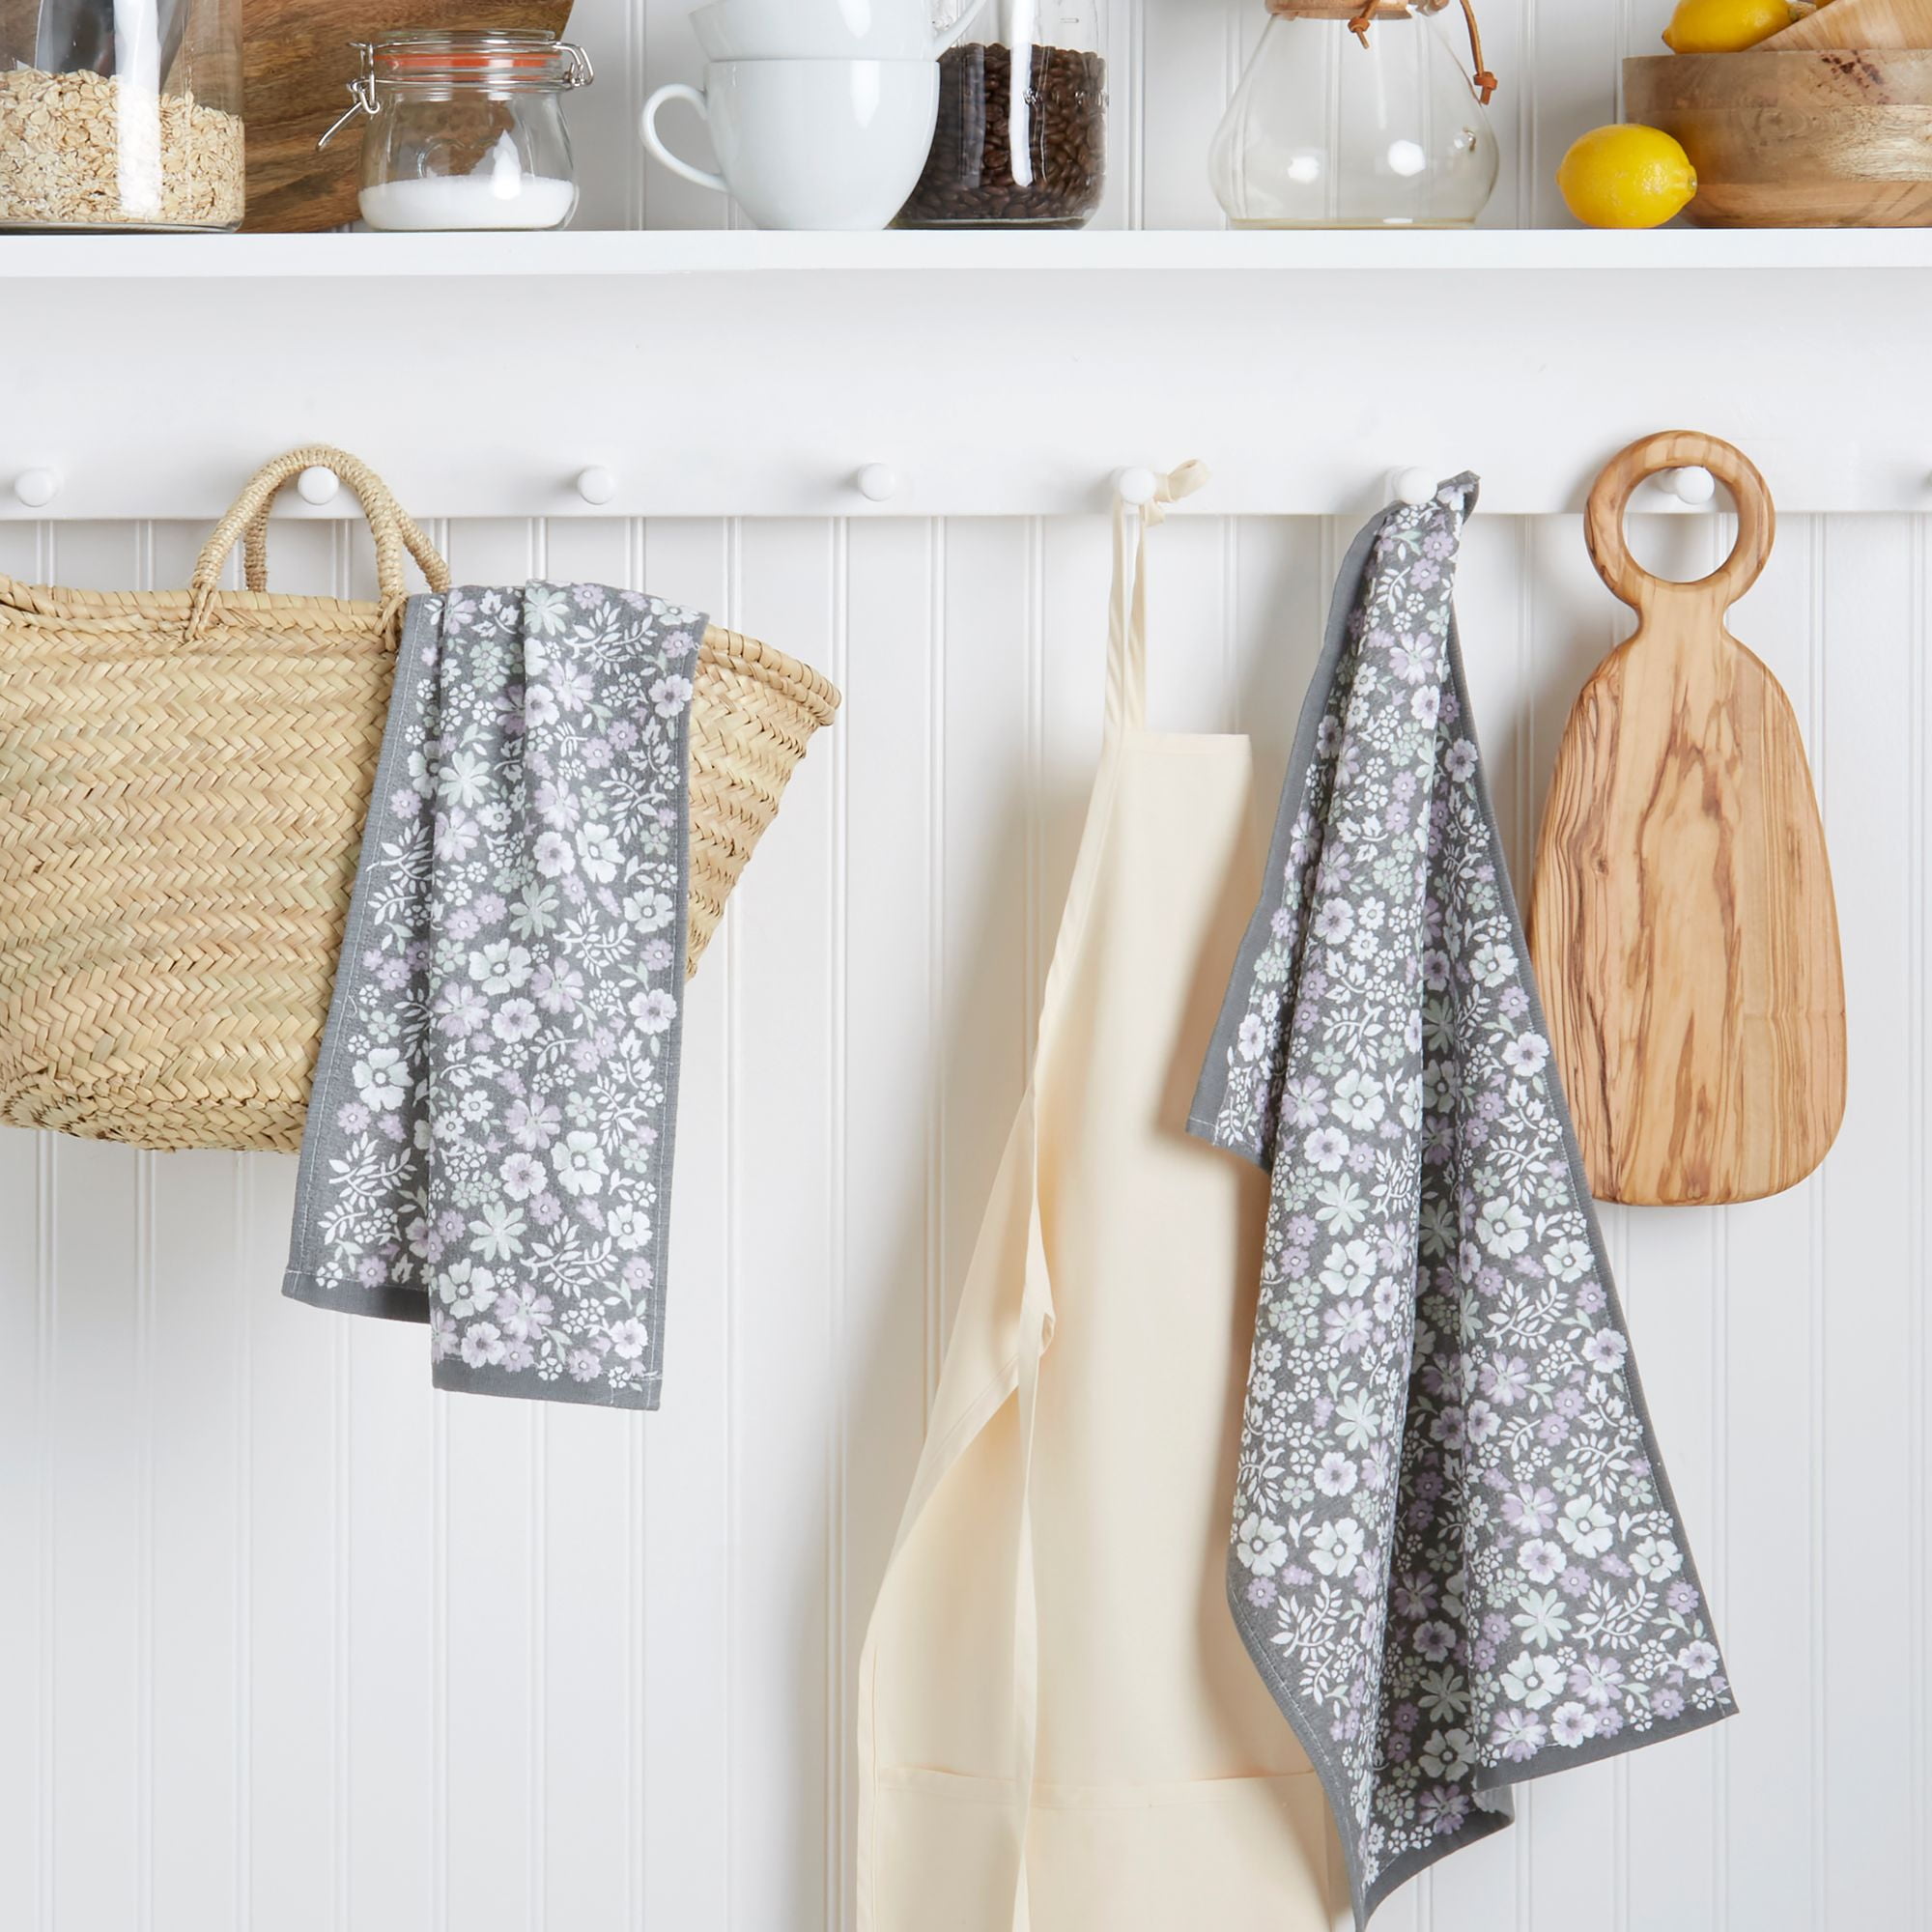 Free Hanging Kitchen Towels Pattern – Mary Maxim